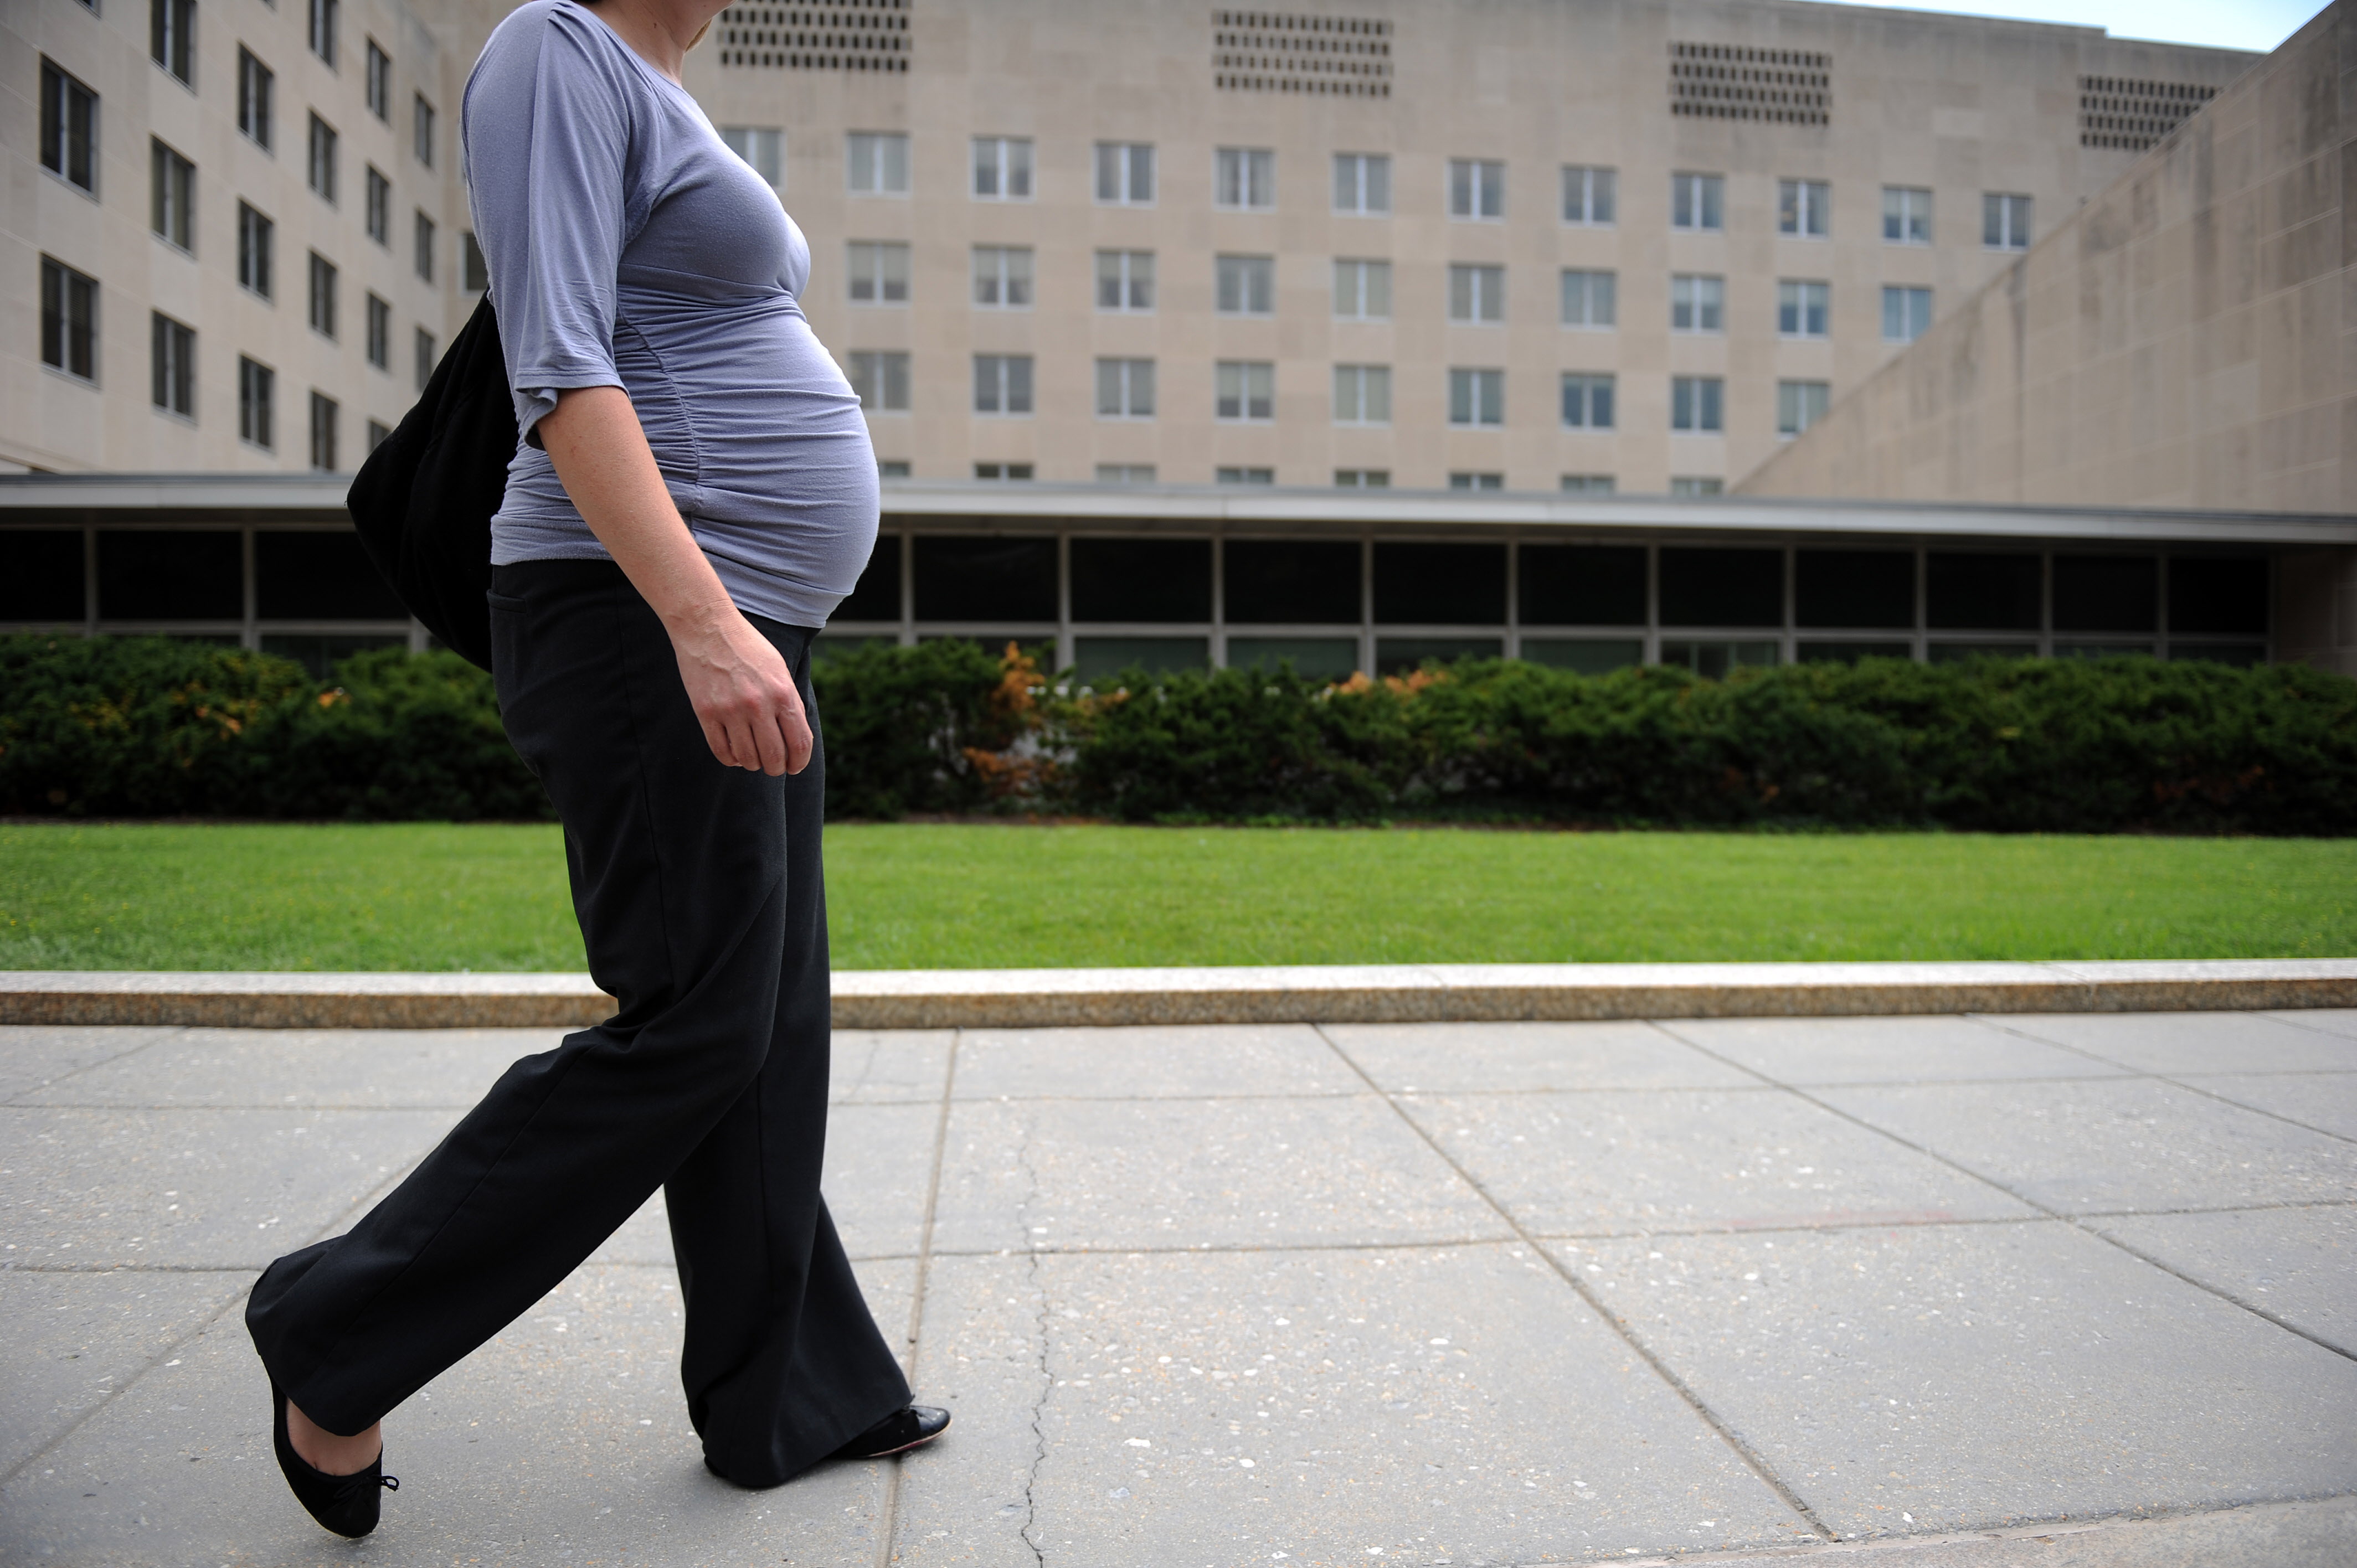 (FILES) This file photo taken on August 5, 2010 shows a pregnant woman walking outside the State Department in Washington, DC.   Doctors have long warned women that getting pregnant later in life can raise the risk of stroke, but a study October 24, 2016 suggested that actually, only young women face this increasing risk. The findings in the Journal of the American Medical Association (JAMA) Neurology compared stroke rates among pregnant and non-pregnant women of different age groups.  / AFP PHOTO / Timothy SLOAN